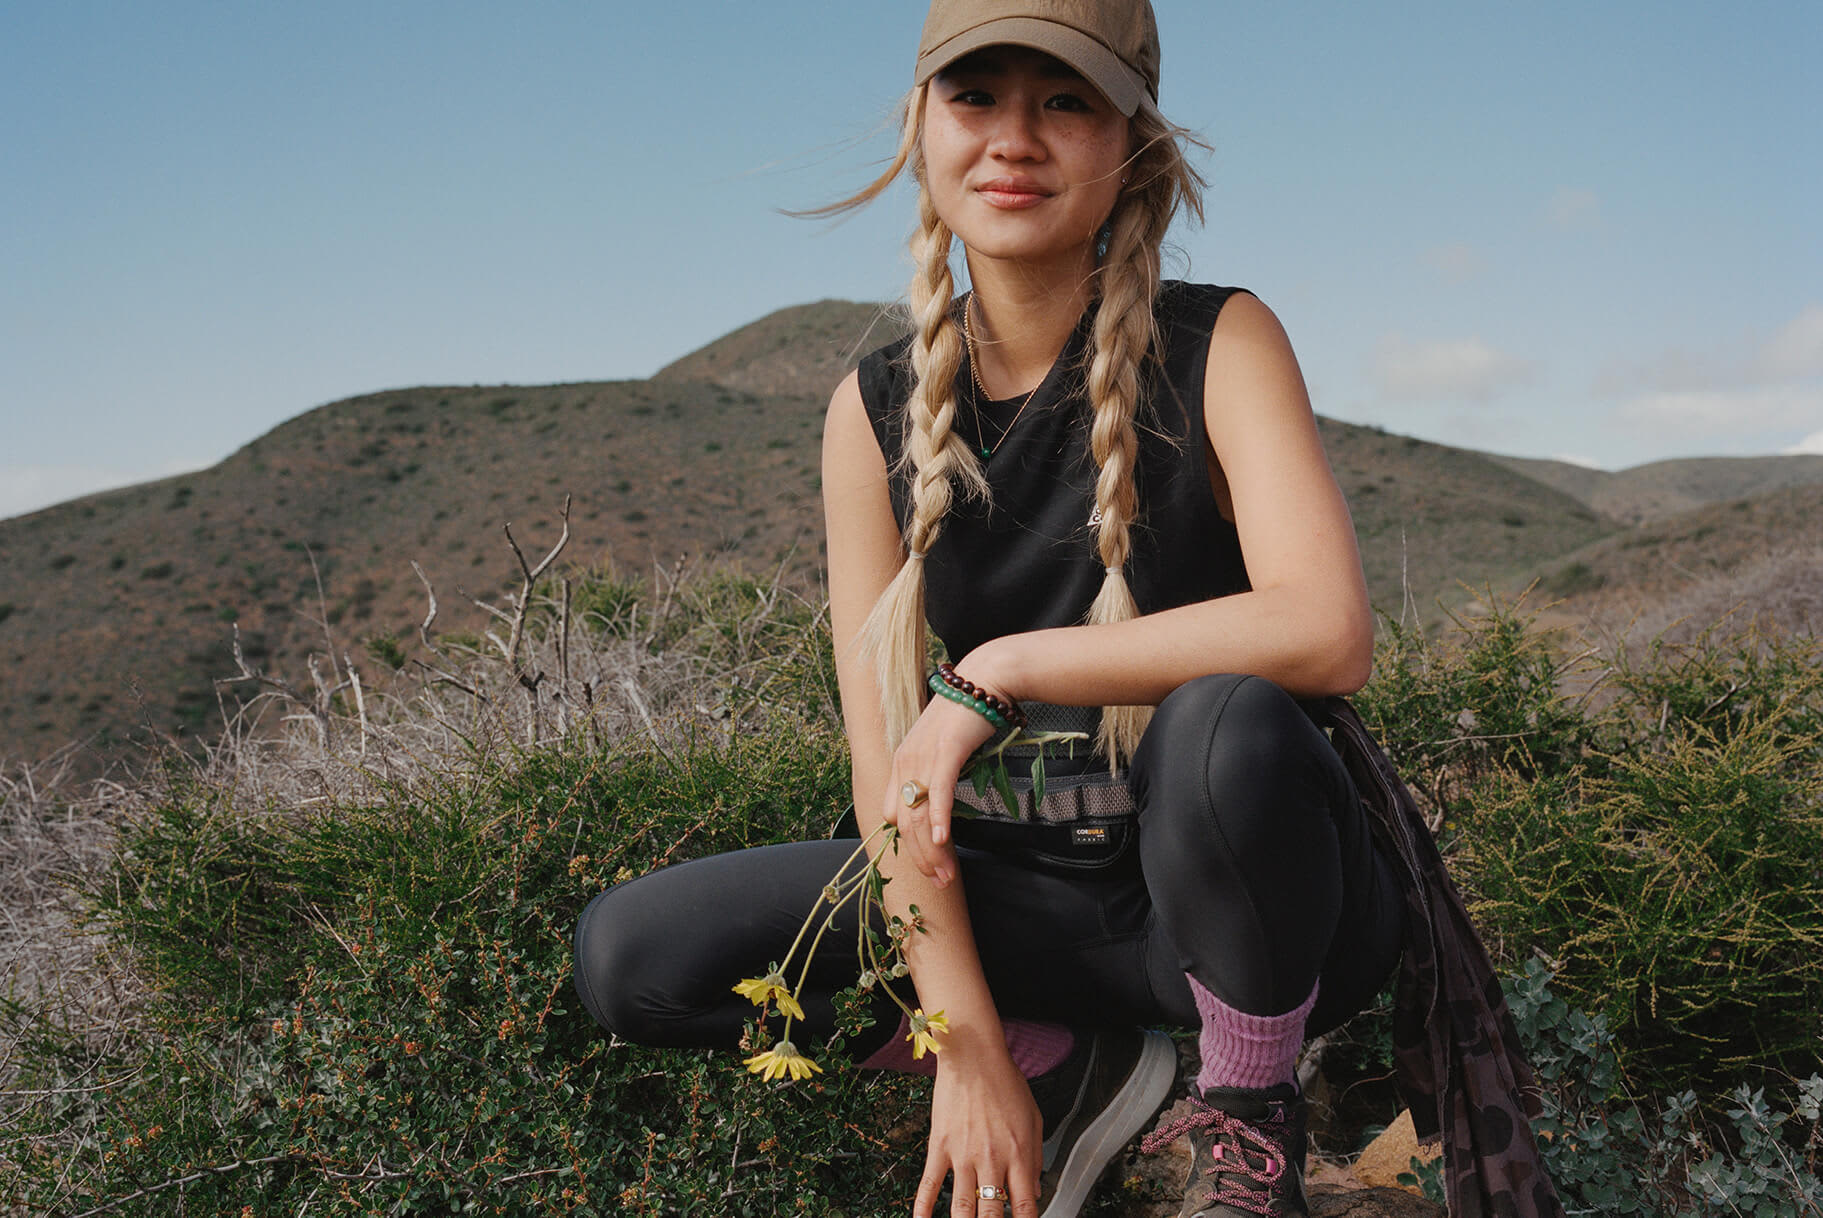 How to Pick the Best Women's Leggings for a Hike